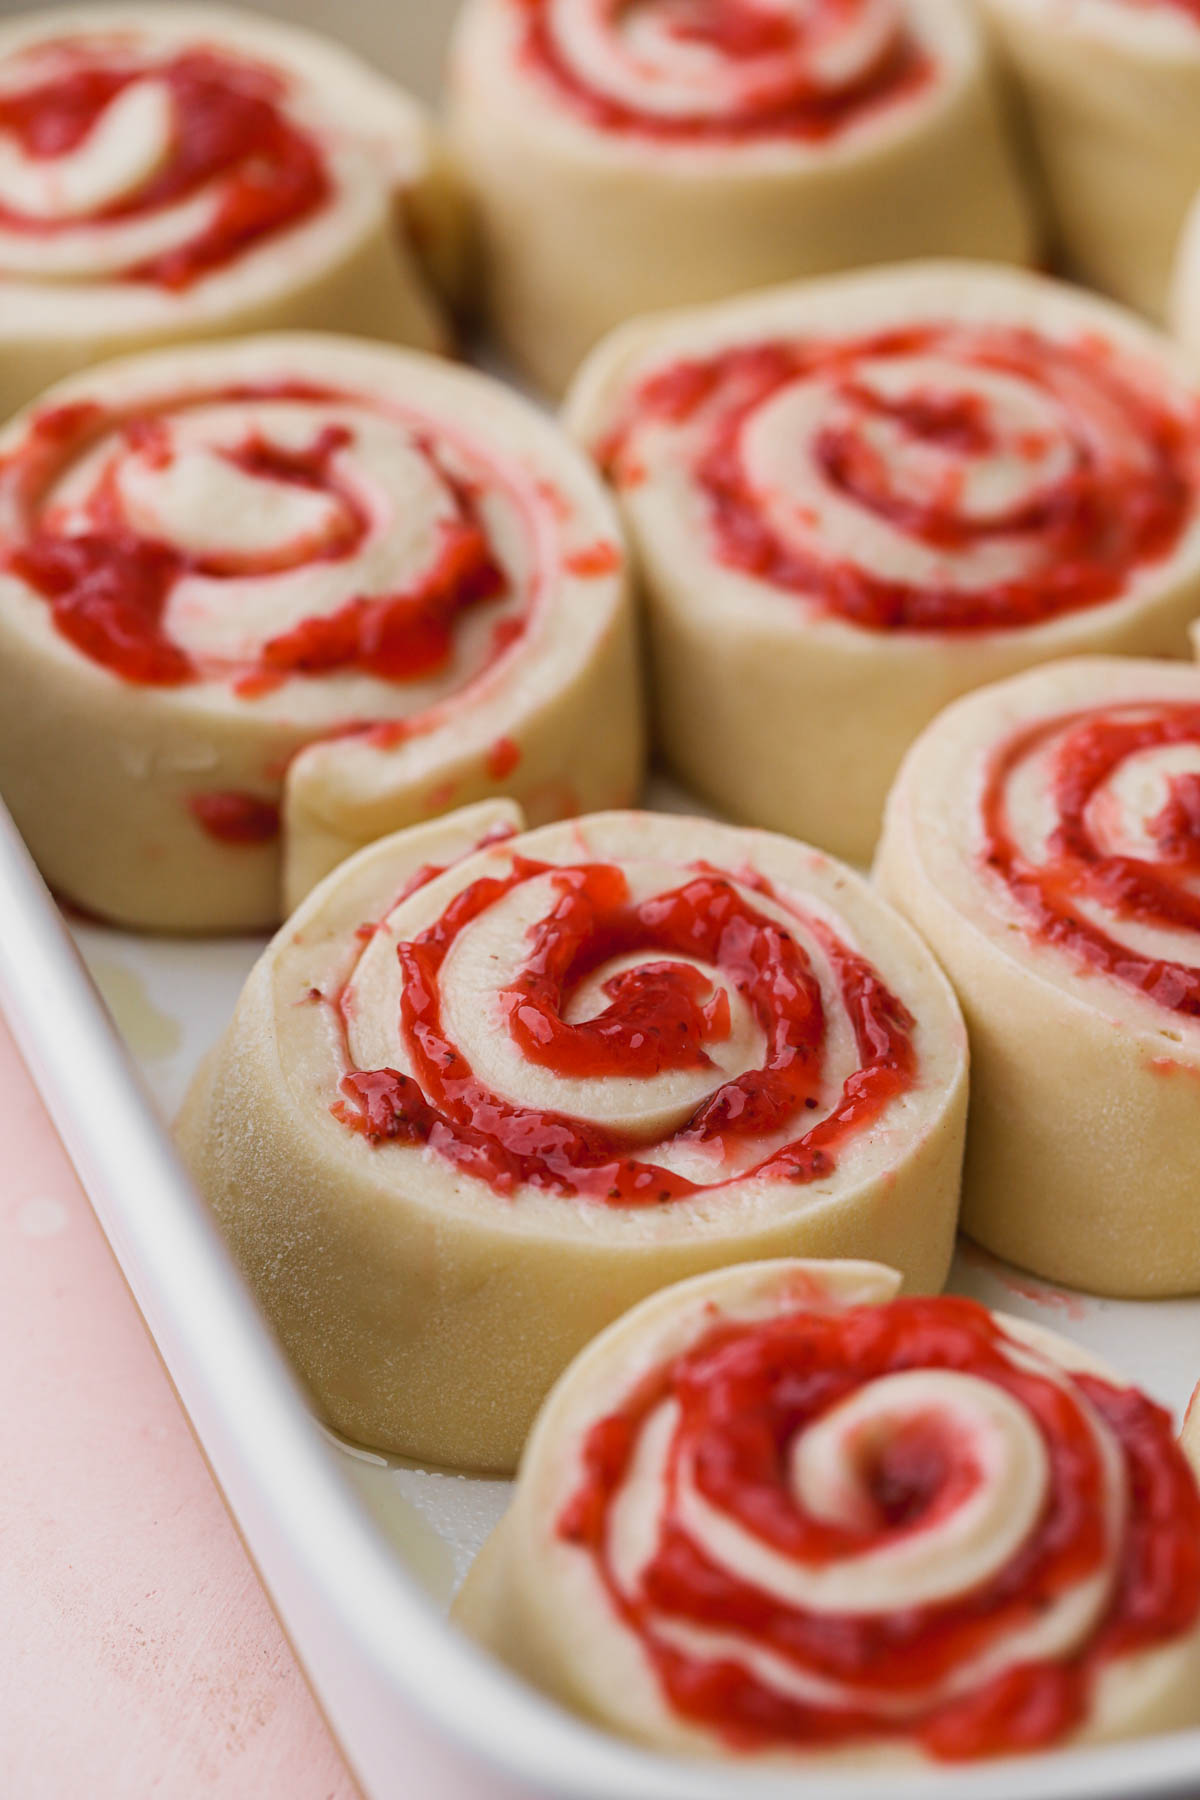 Rolled up dough with strawberry filling. 